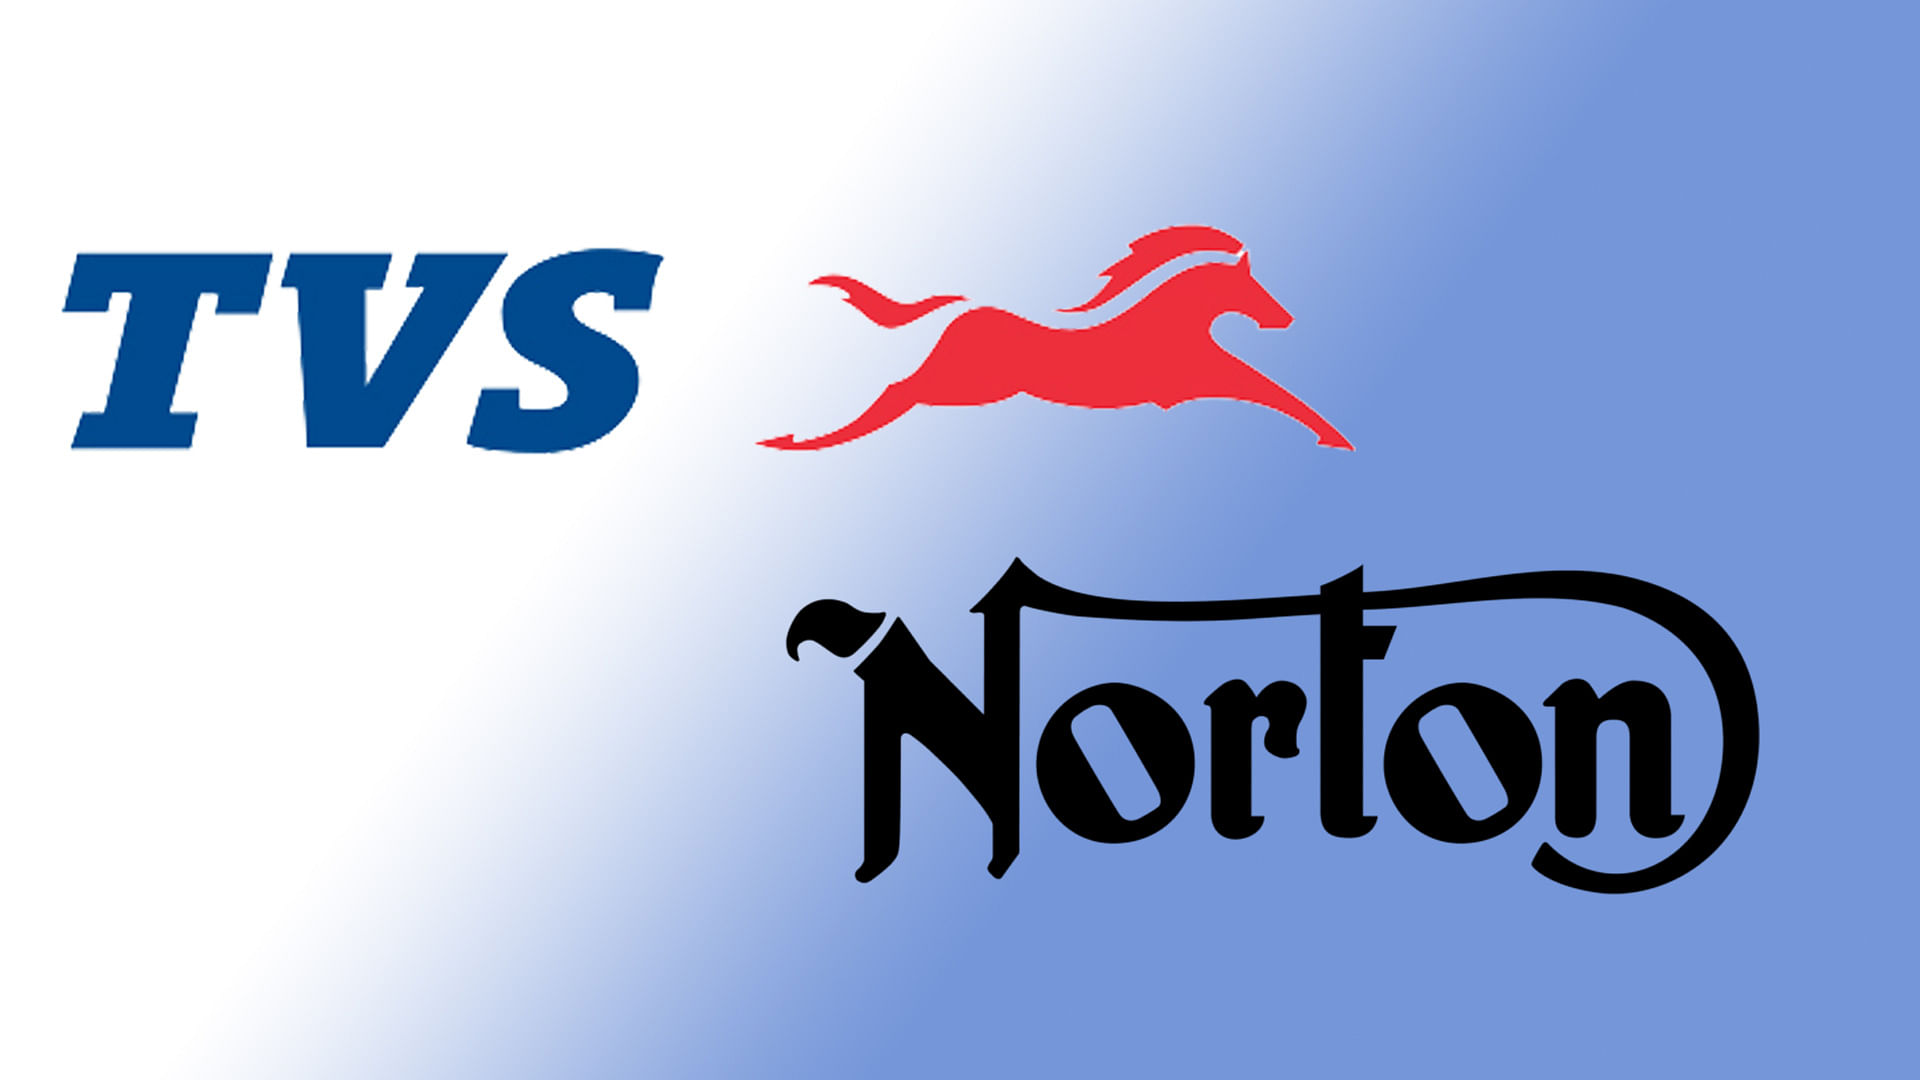 TVS Motor has acquired Norton for 16 million pounds as per the report.